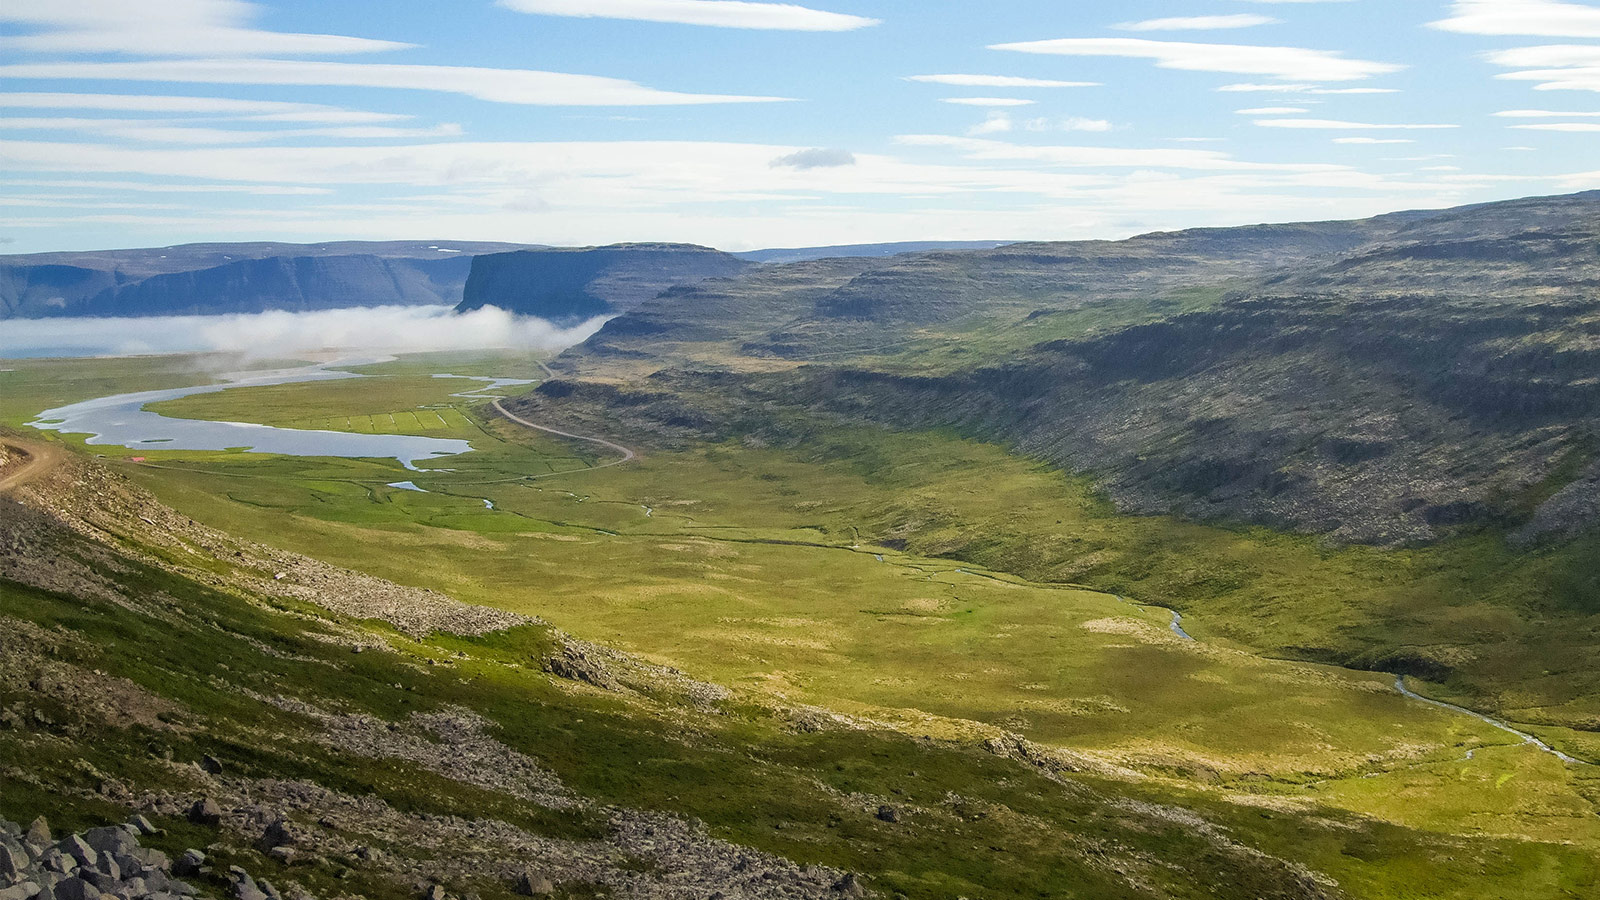 A valley lit by the sun among mountains in Iceland's Westfjords